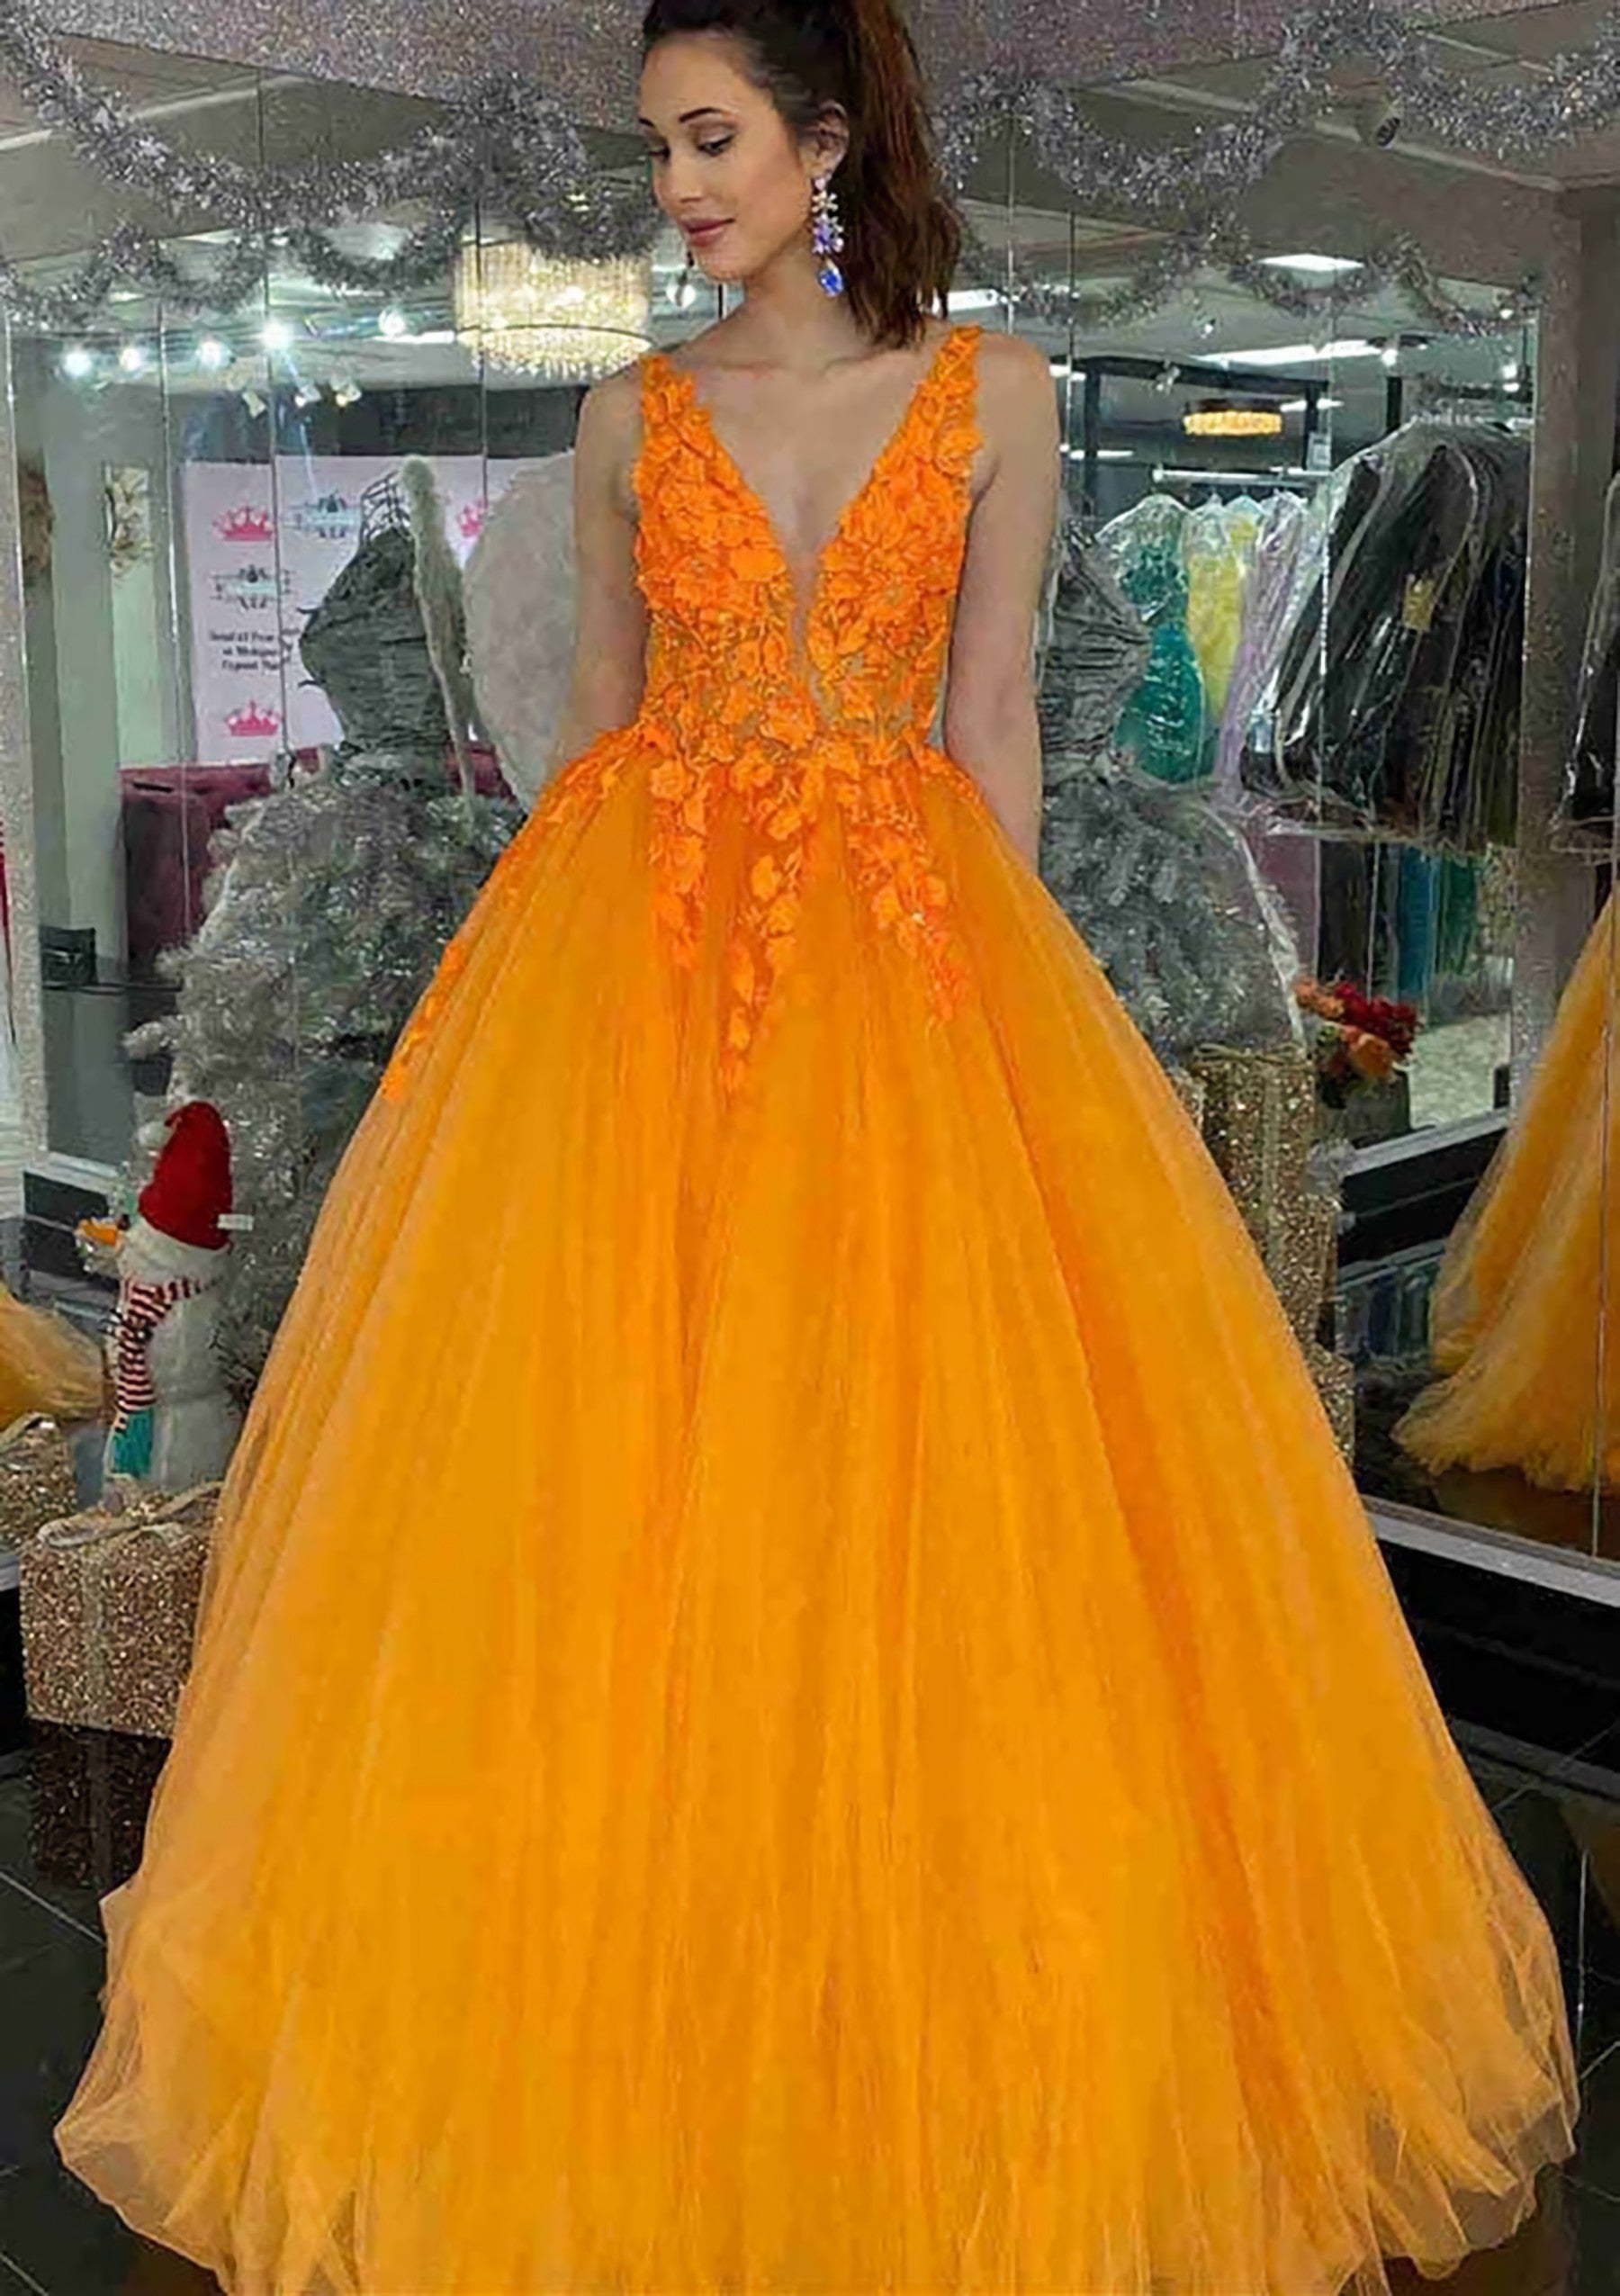 Princess V Neck Long Floor Length Tulle Prom Dress Outfits For Women With Appliqued